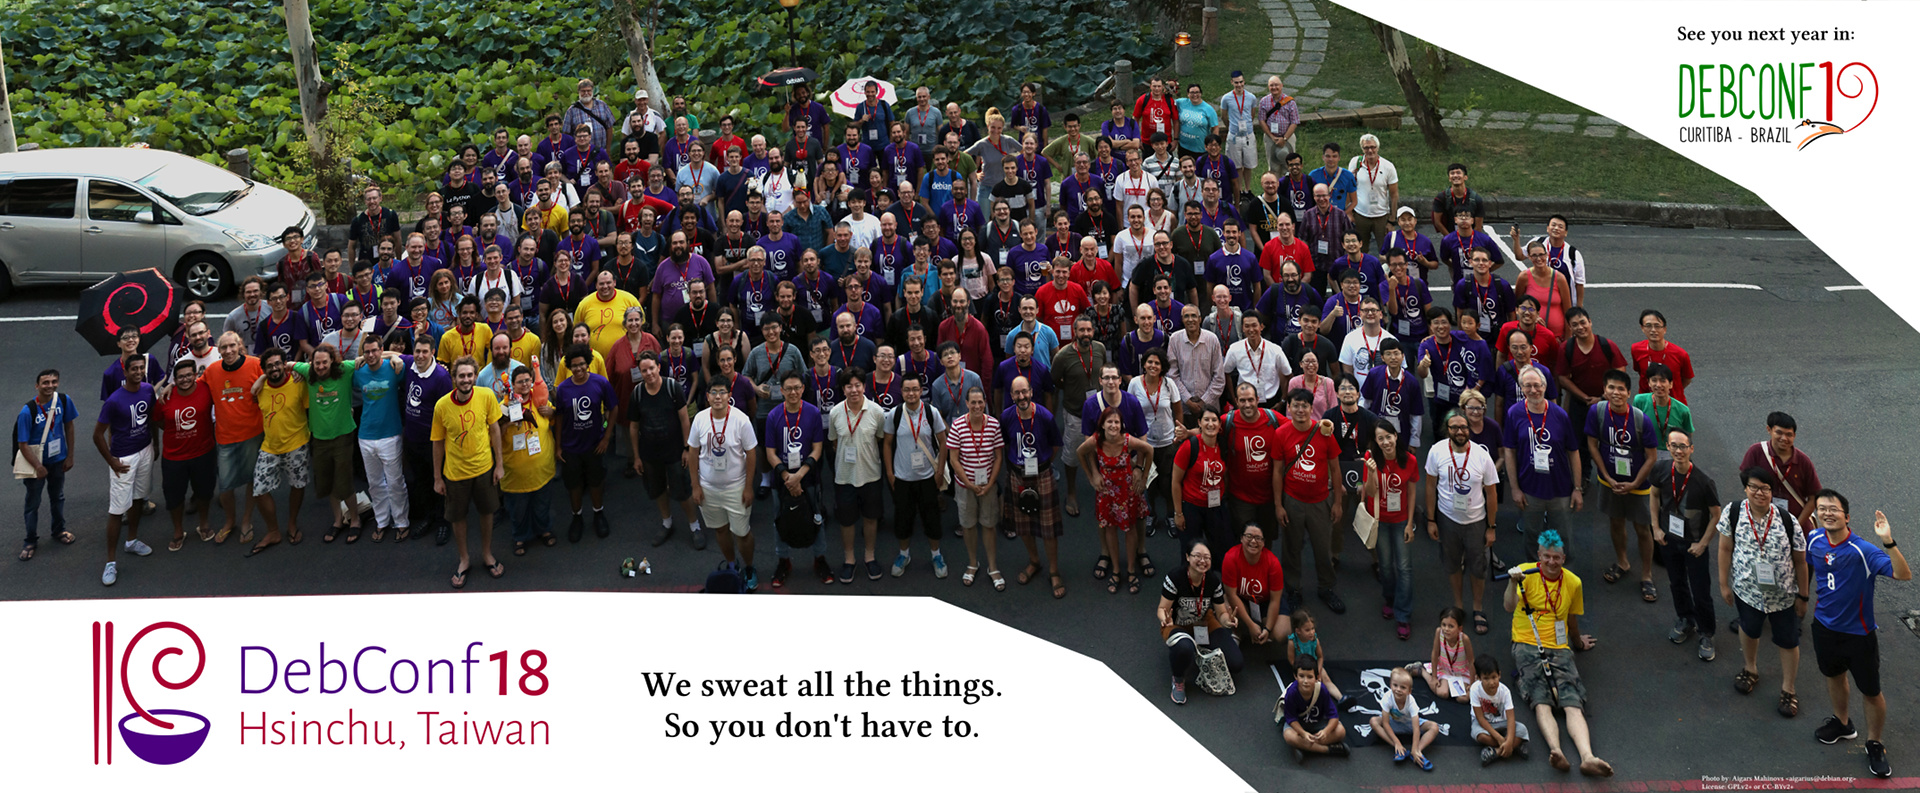 Debconf18 group photo small.jpg